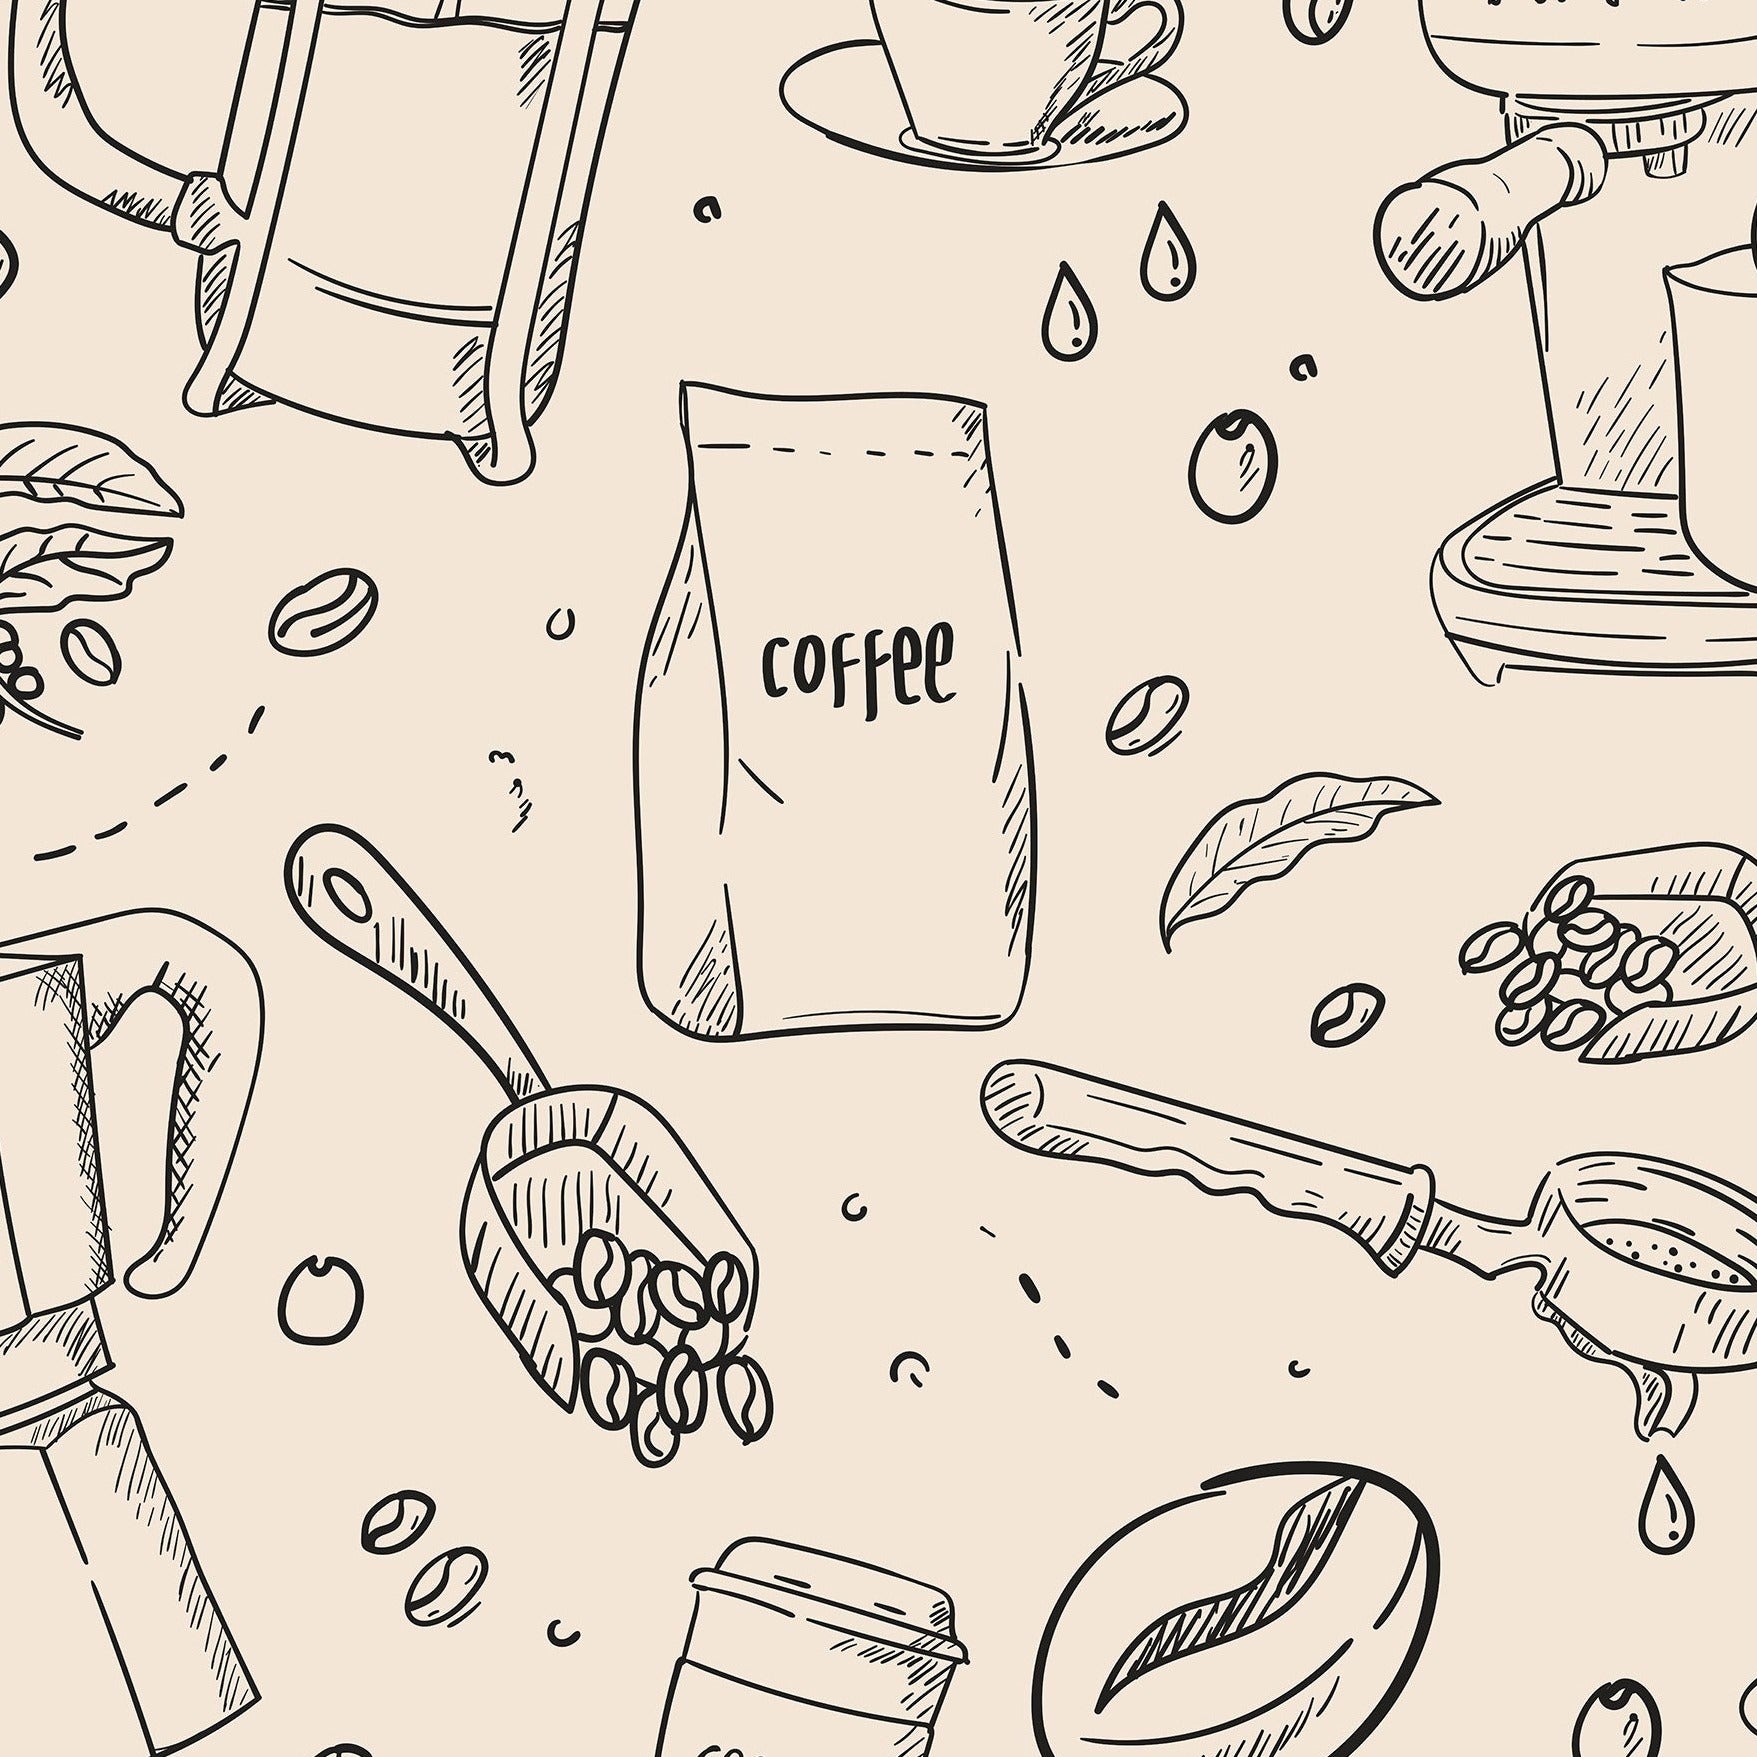 Close-up view of a wallpaper showcasing hand-drawn illustrations of coffee-related items, including coffee makers, beans, and mugs scattered in a seamless pattern on a cream background.